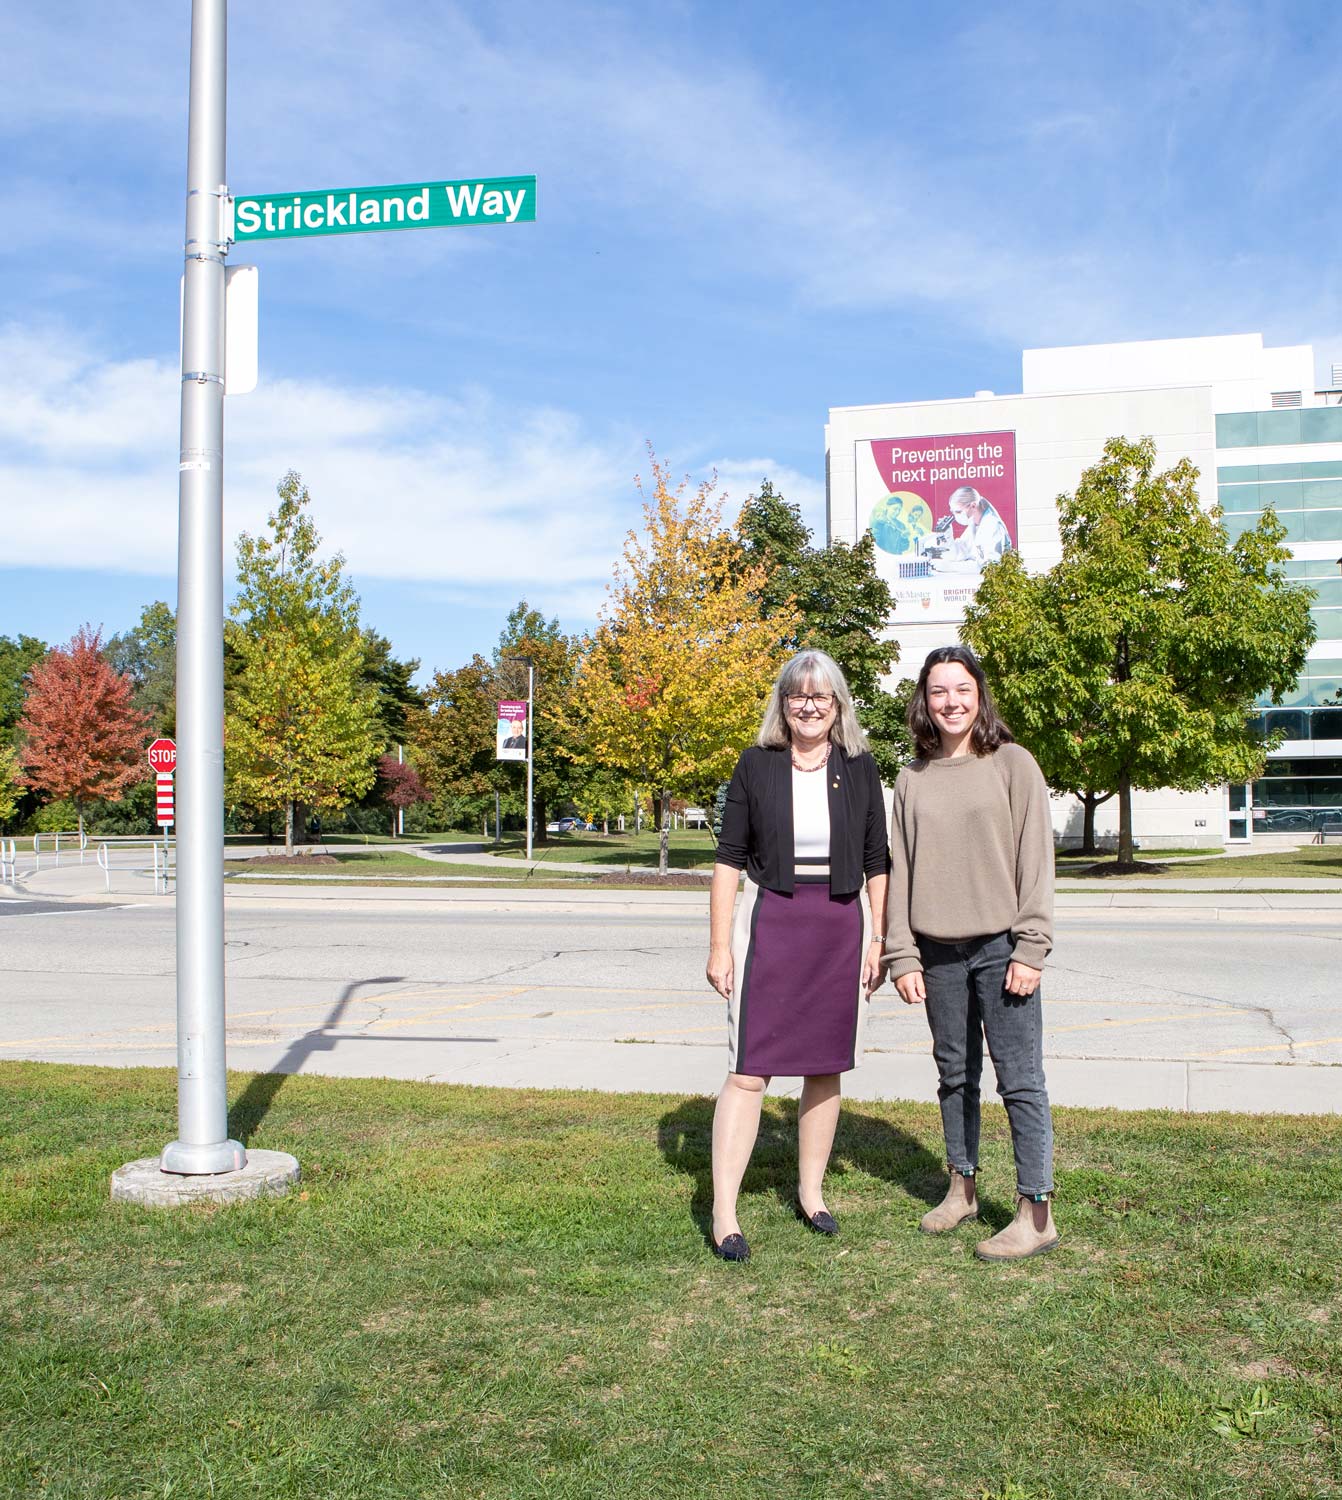 Donna Strickland stands with Emma Magee under the Strickland Way street sign